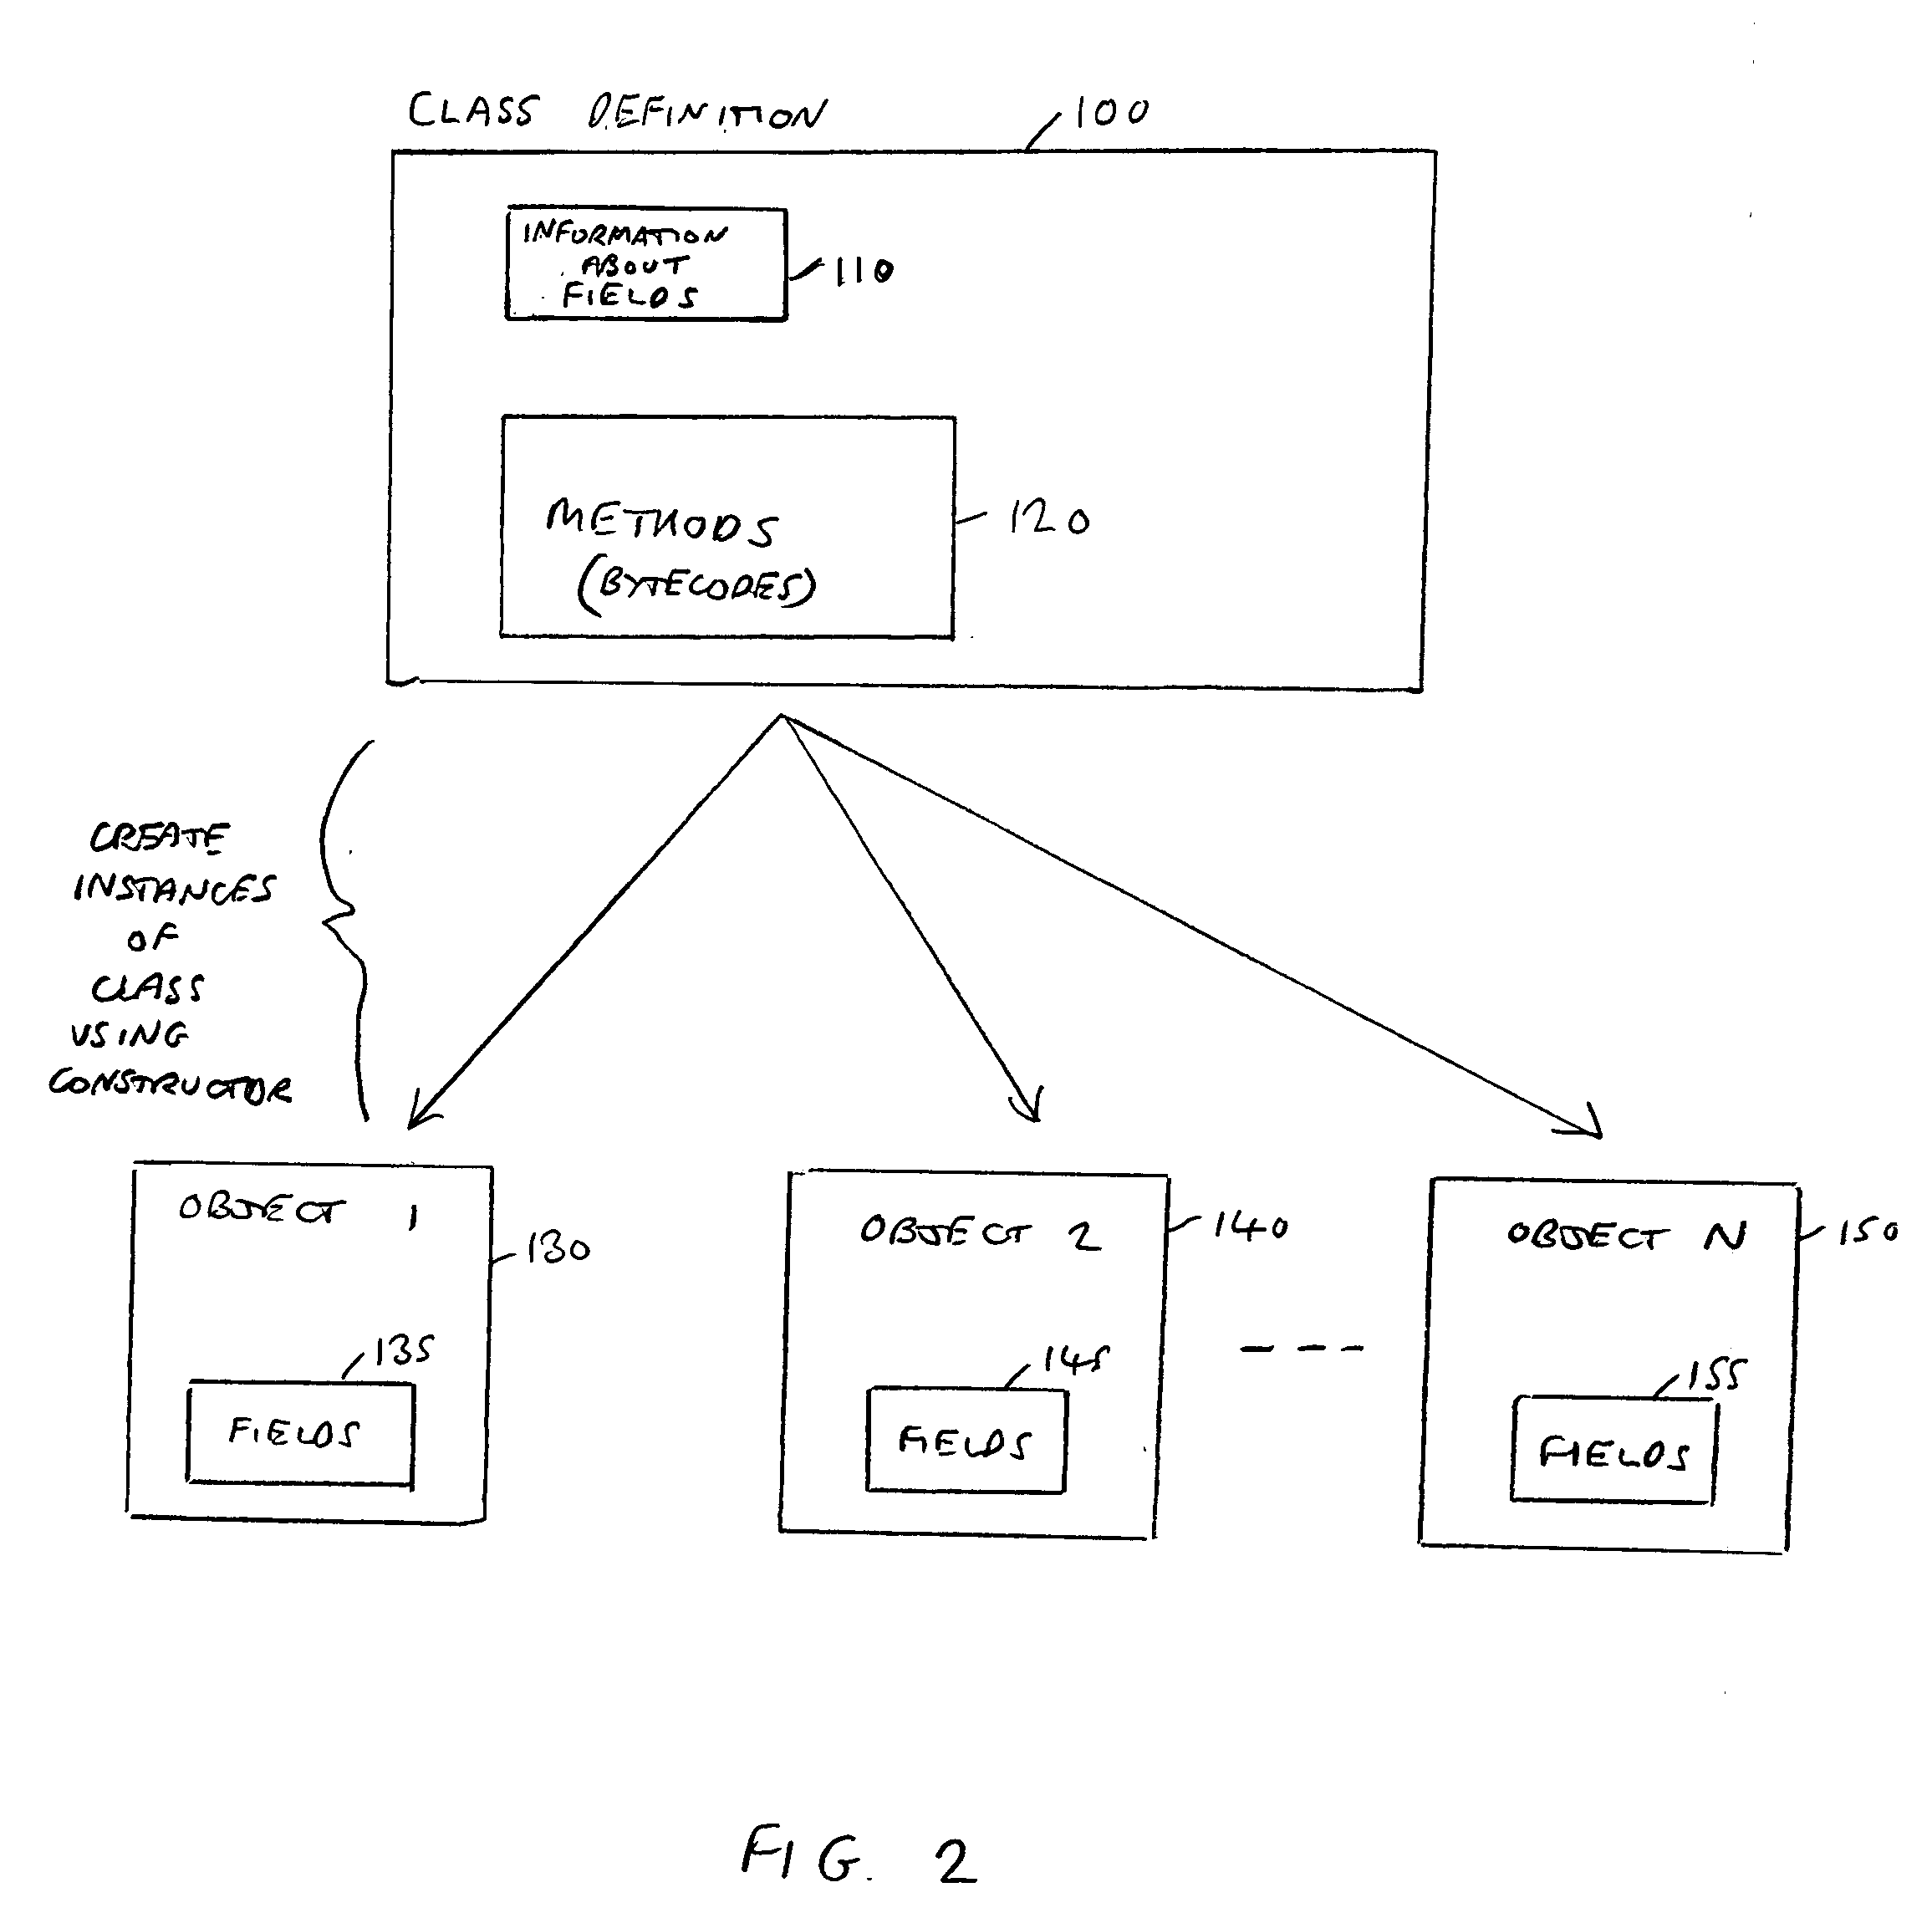 Data processing apparatus, method and computer program product for reducing memory usage of an object oriented program